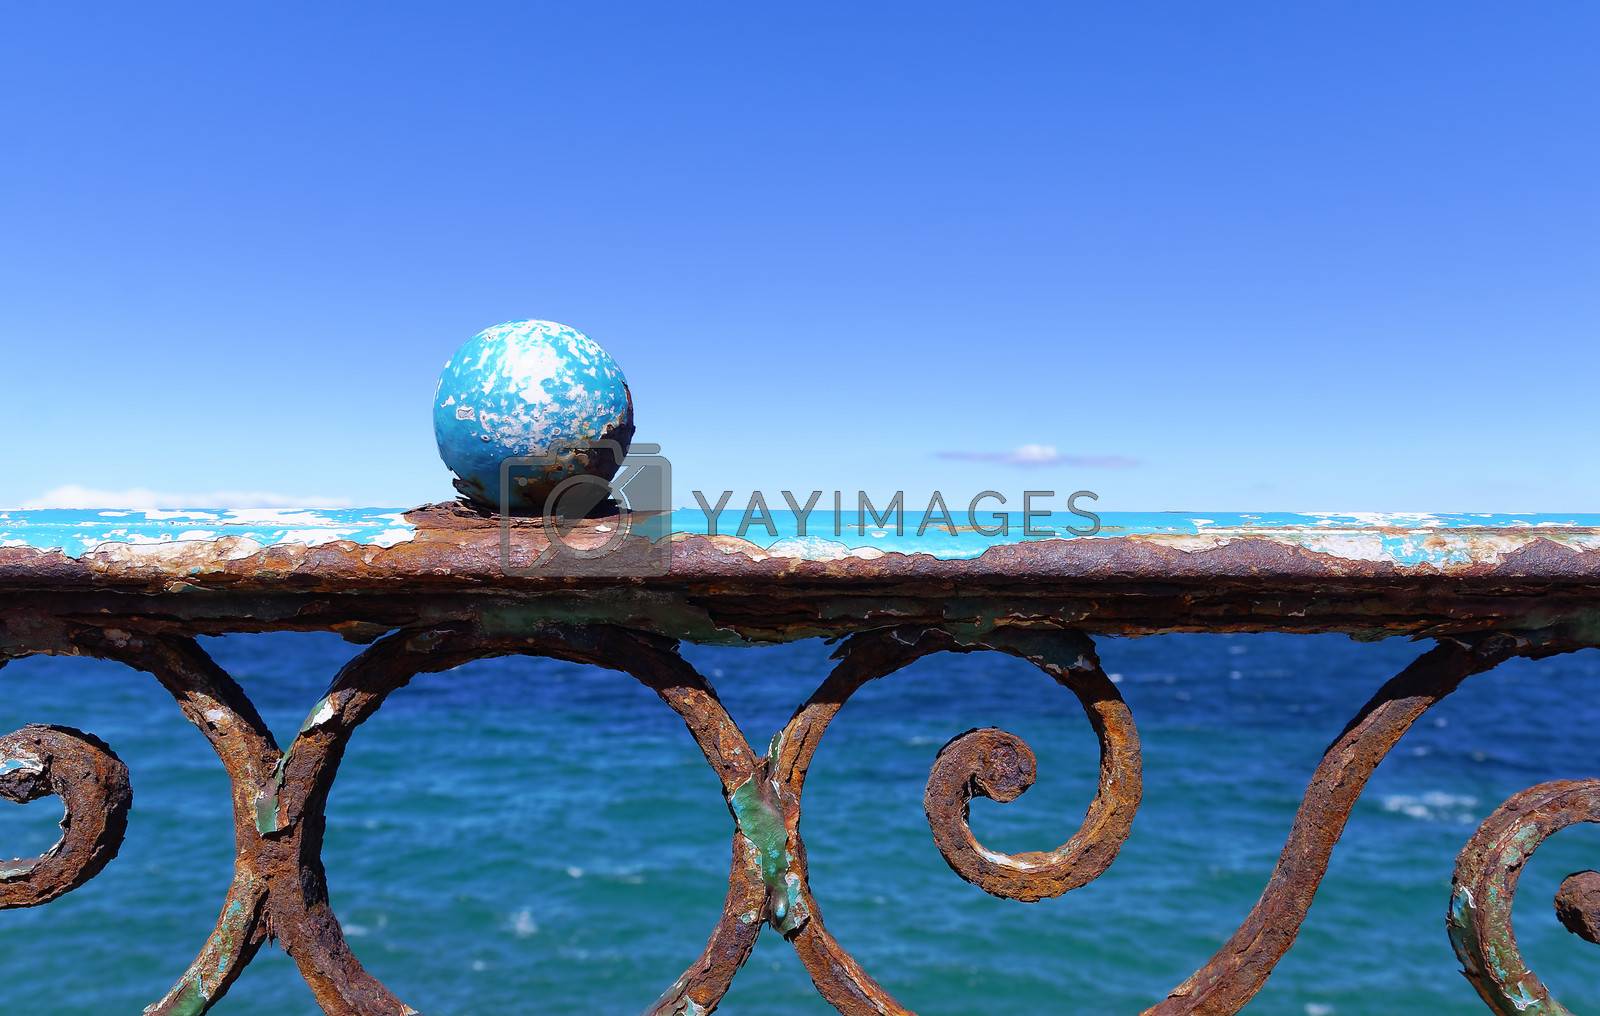 Royalty free image of sea front by gufoto